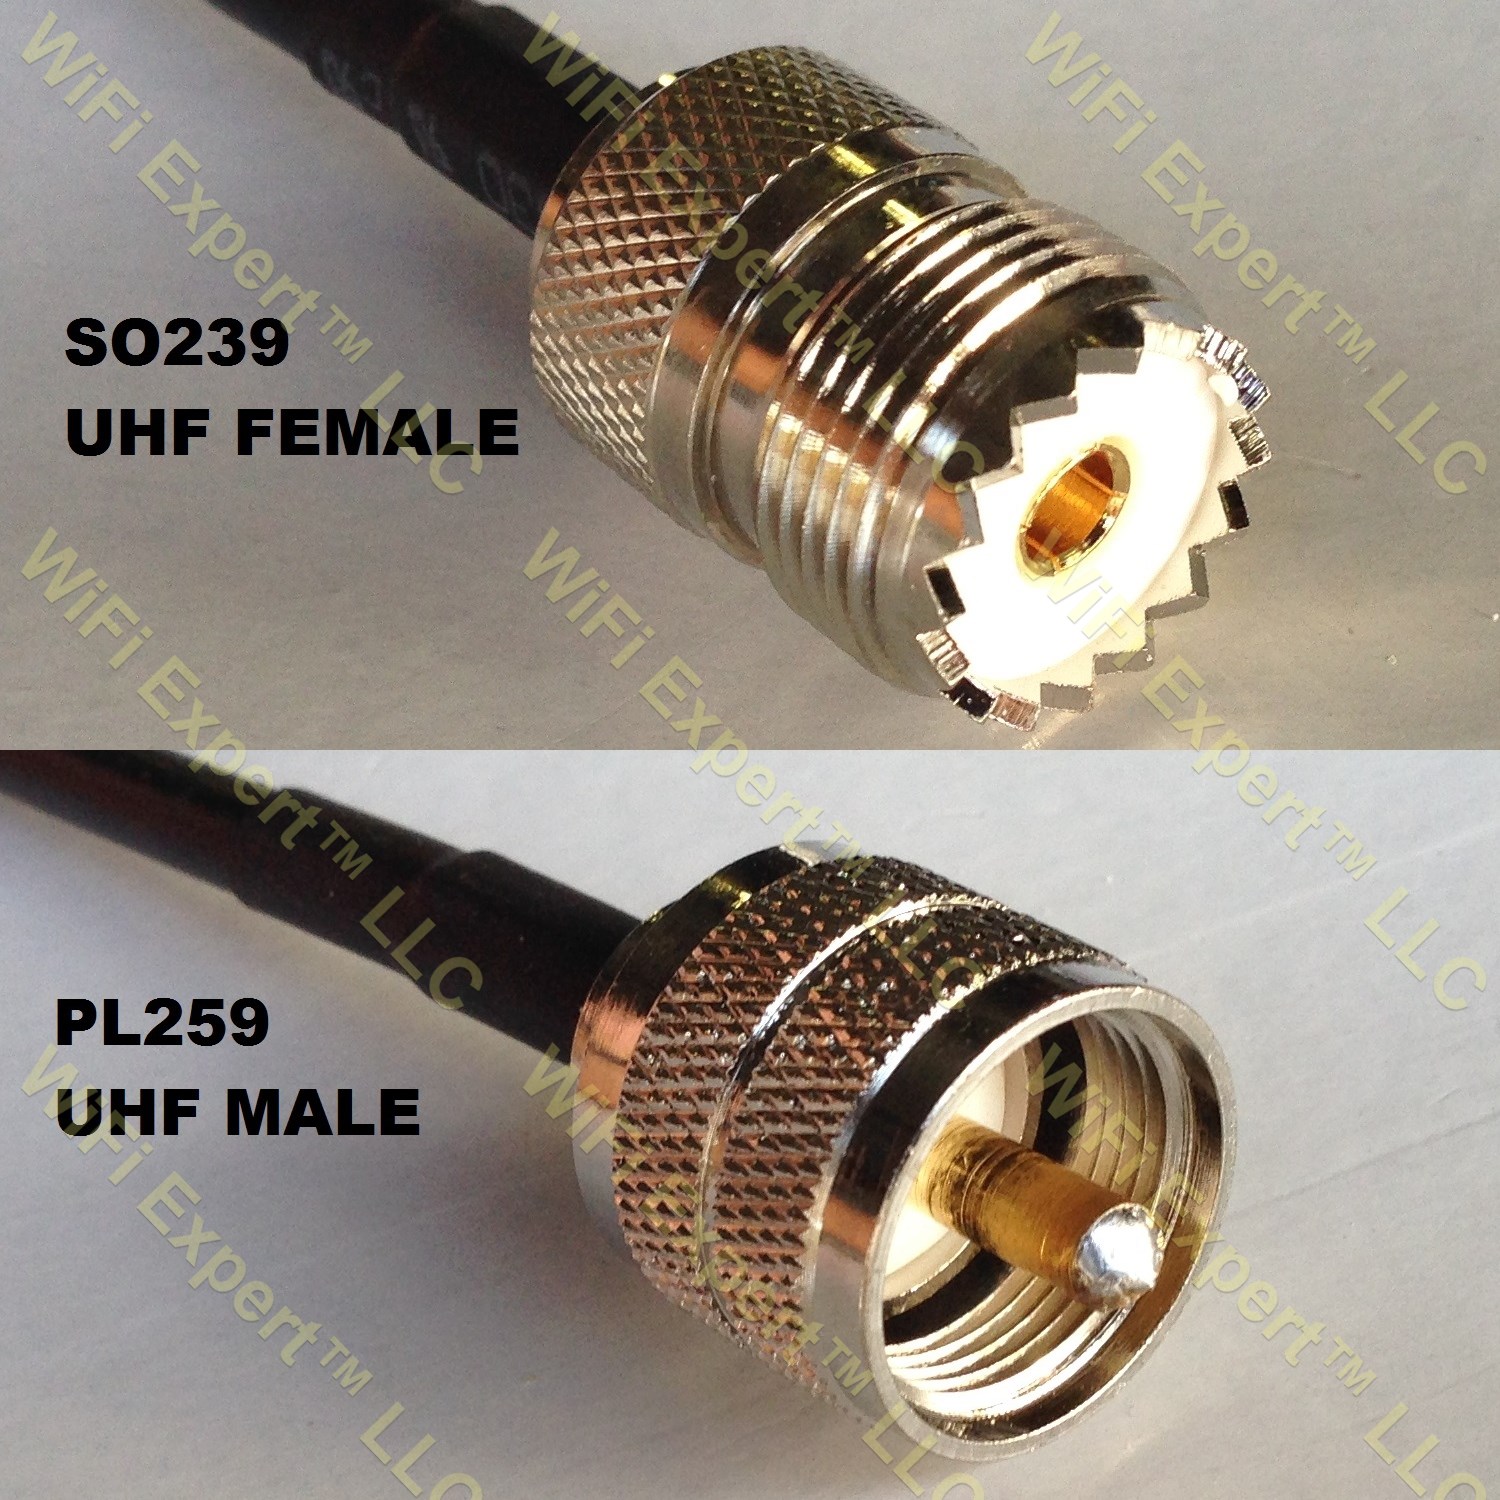 TIMES® RF pigtail cable UHF PL259 male to UHF SO239 female LMR400 100-200 FEET 